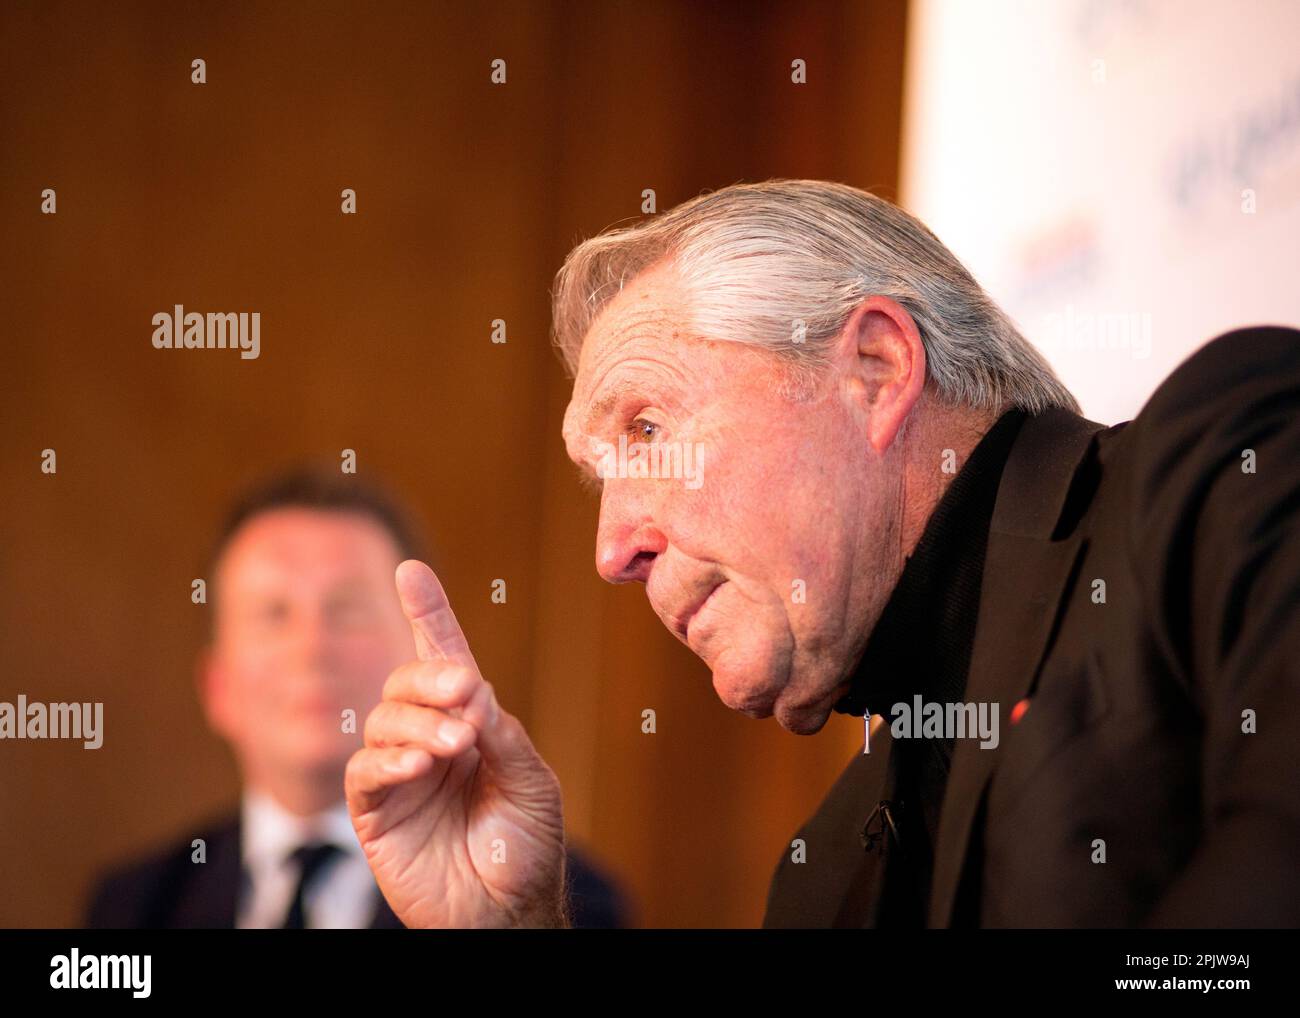 World Champion Golfer Gary Player with David Tanner in the background Stock Photo